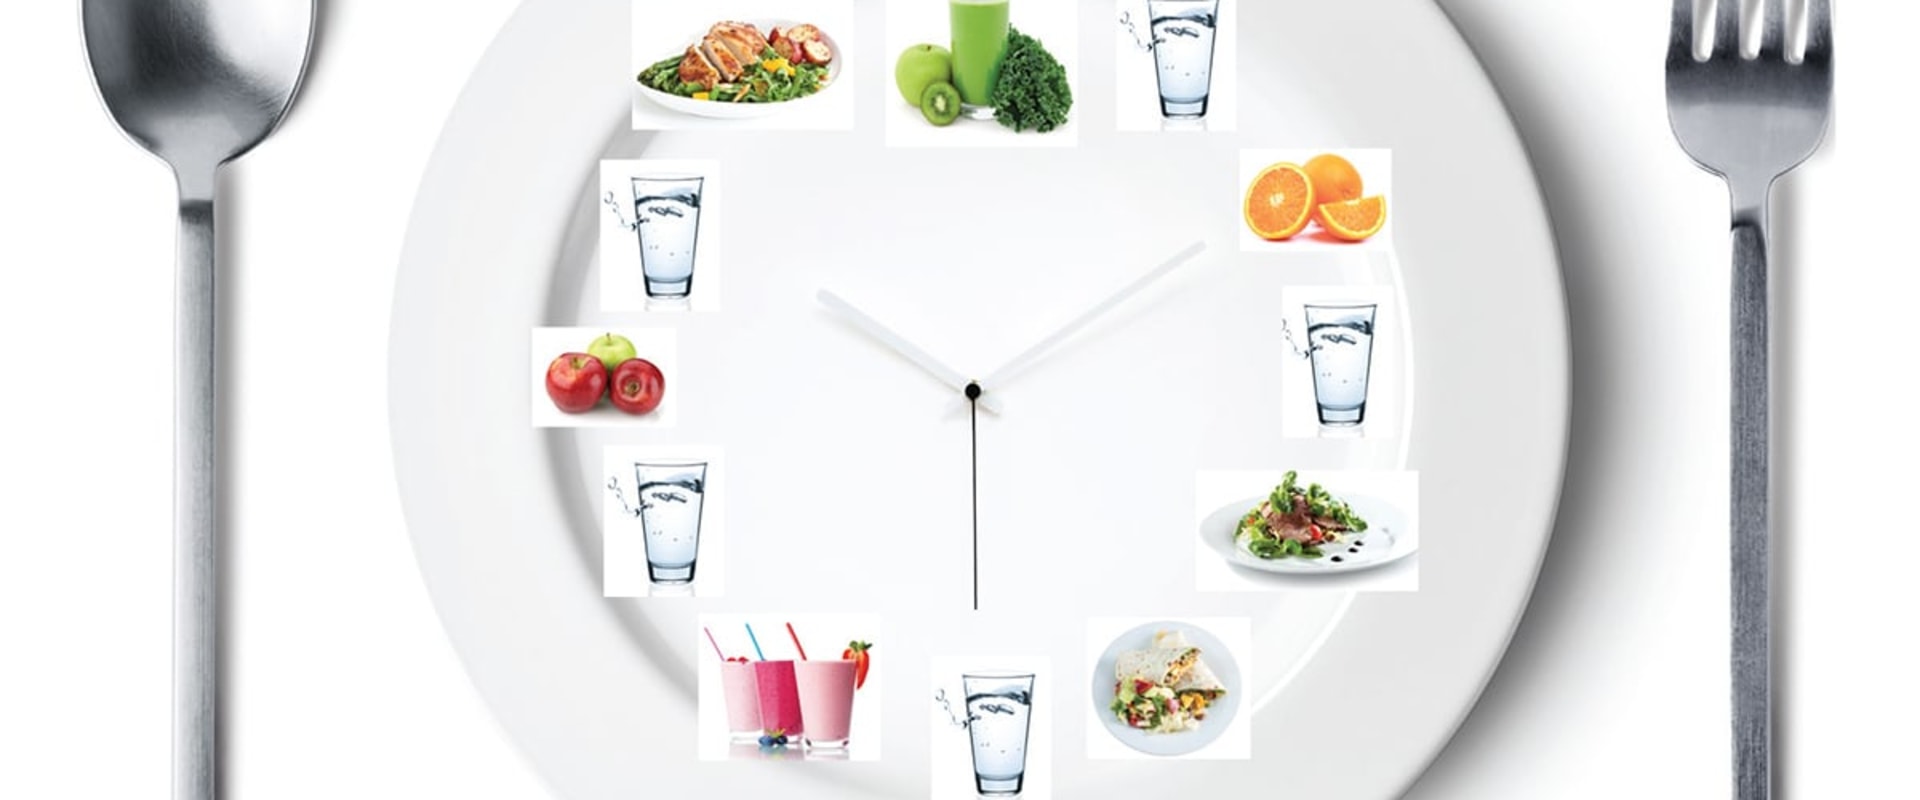 Post-Workout Meals for Bodybuilders: Meal Timing and Planning